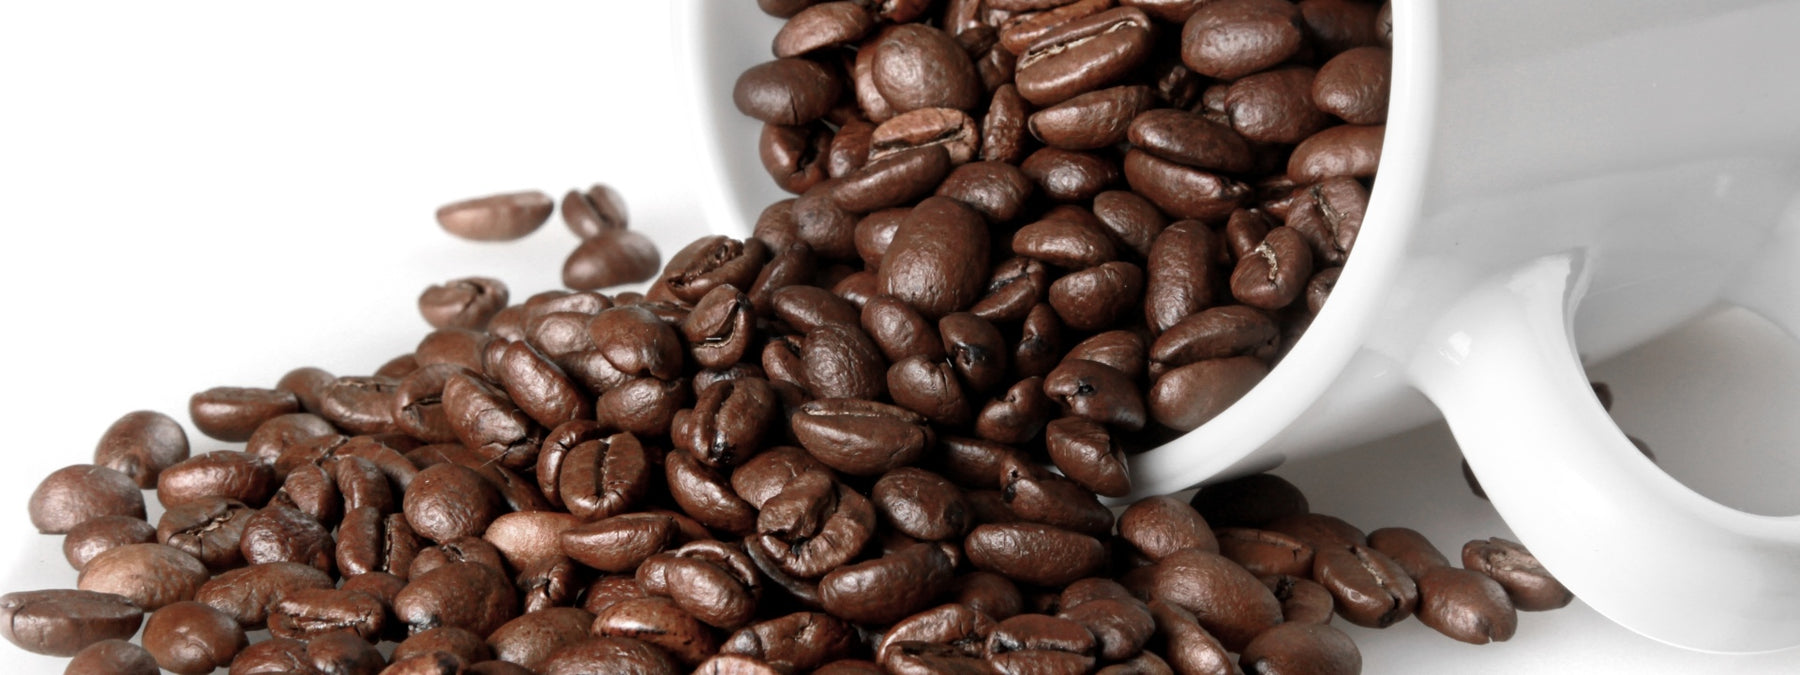 Pocket Guide to Caffeine Benefits and Uses